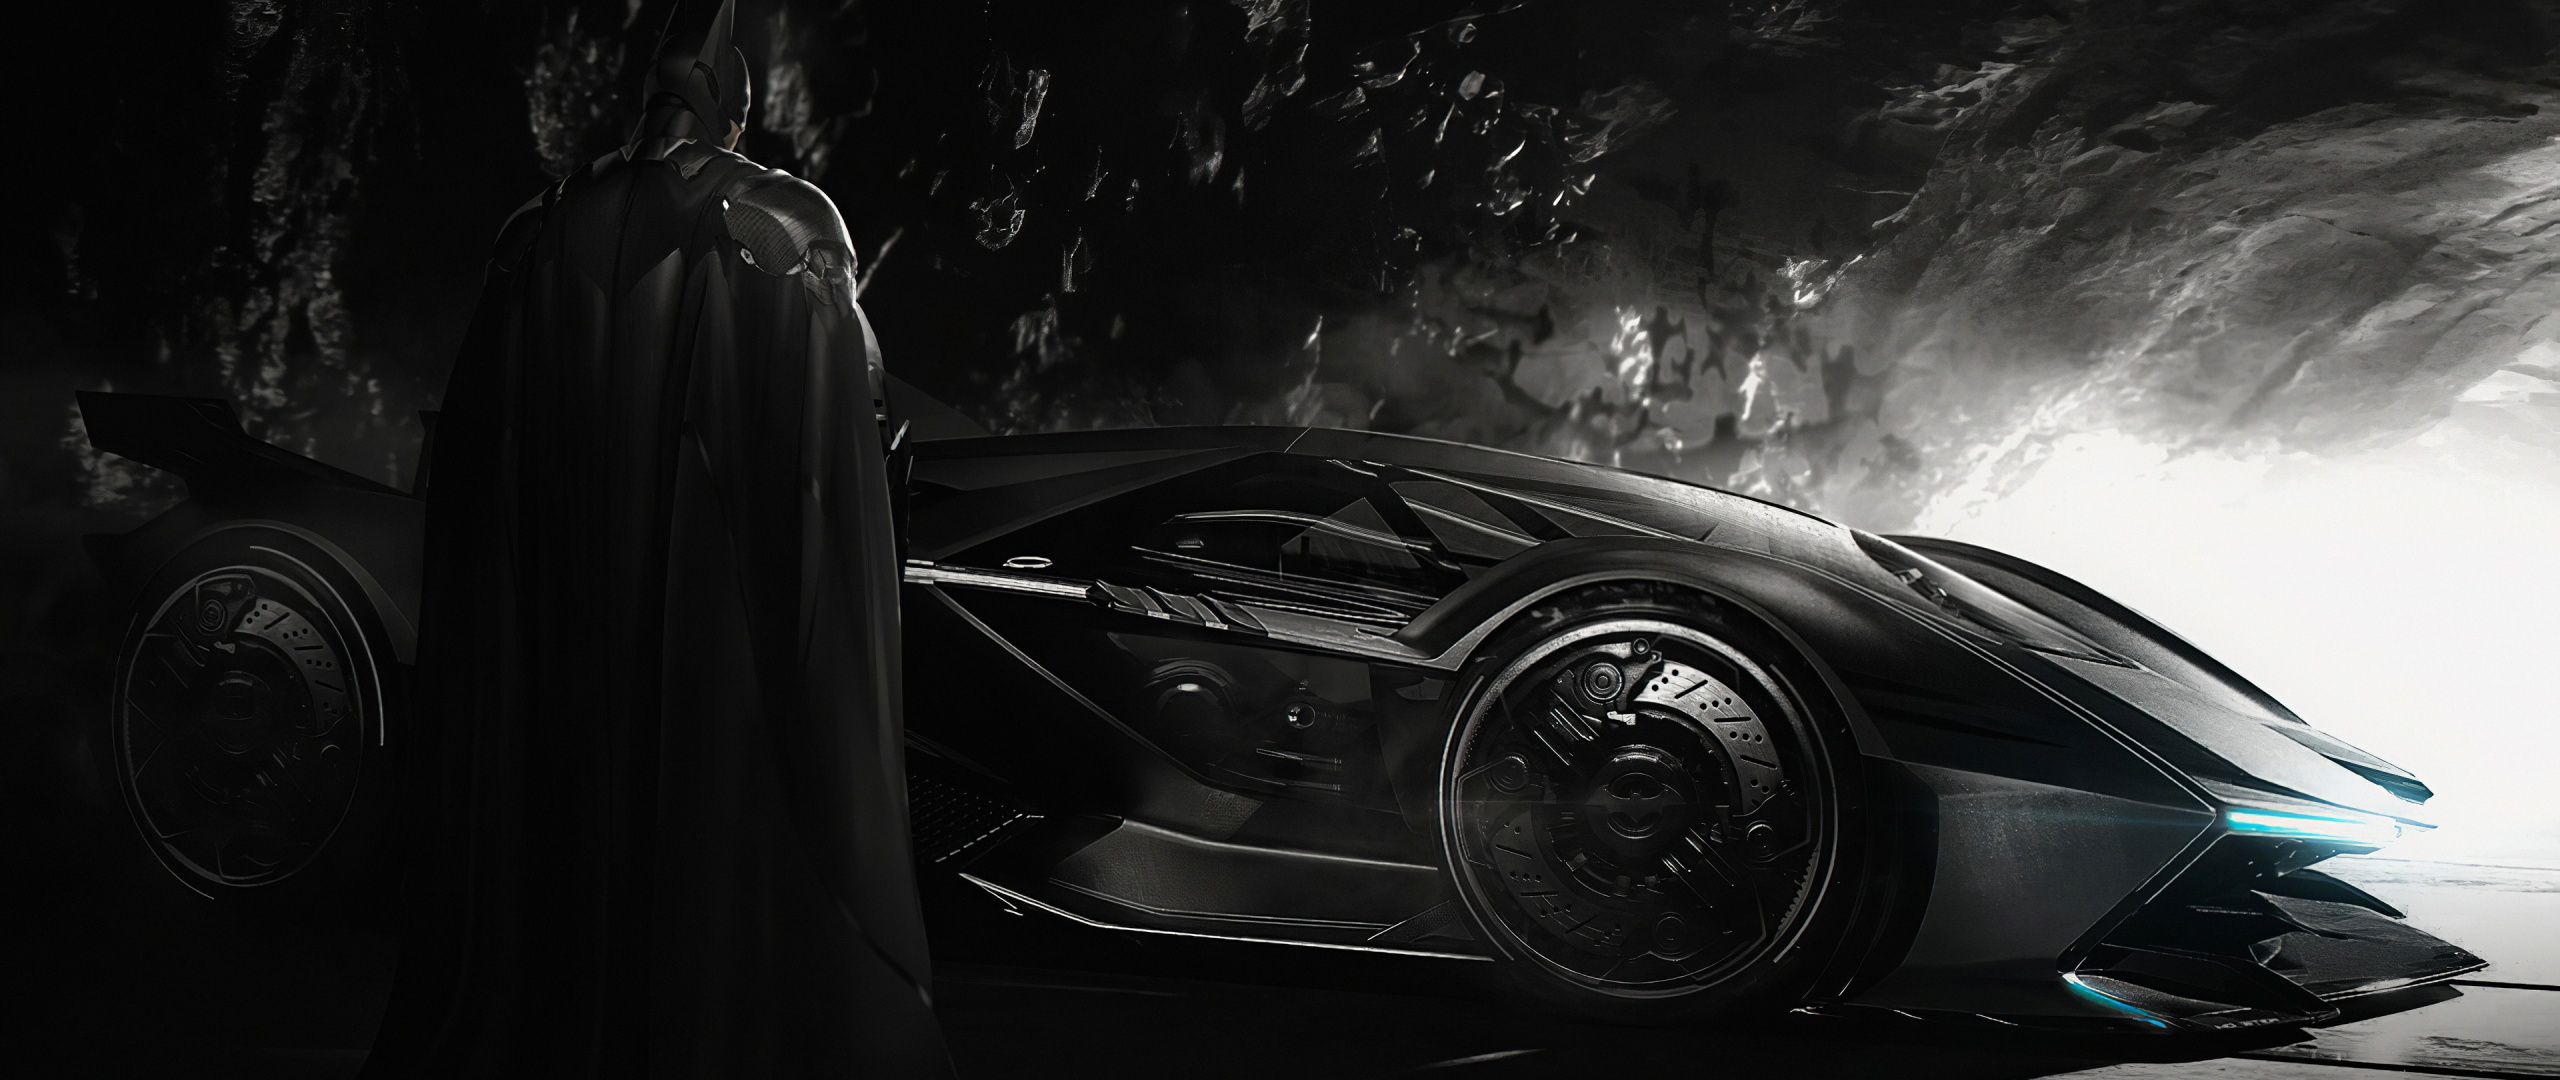 Batcave Wallpapers 68 pictures